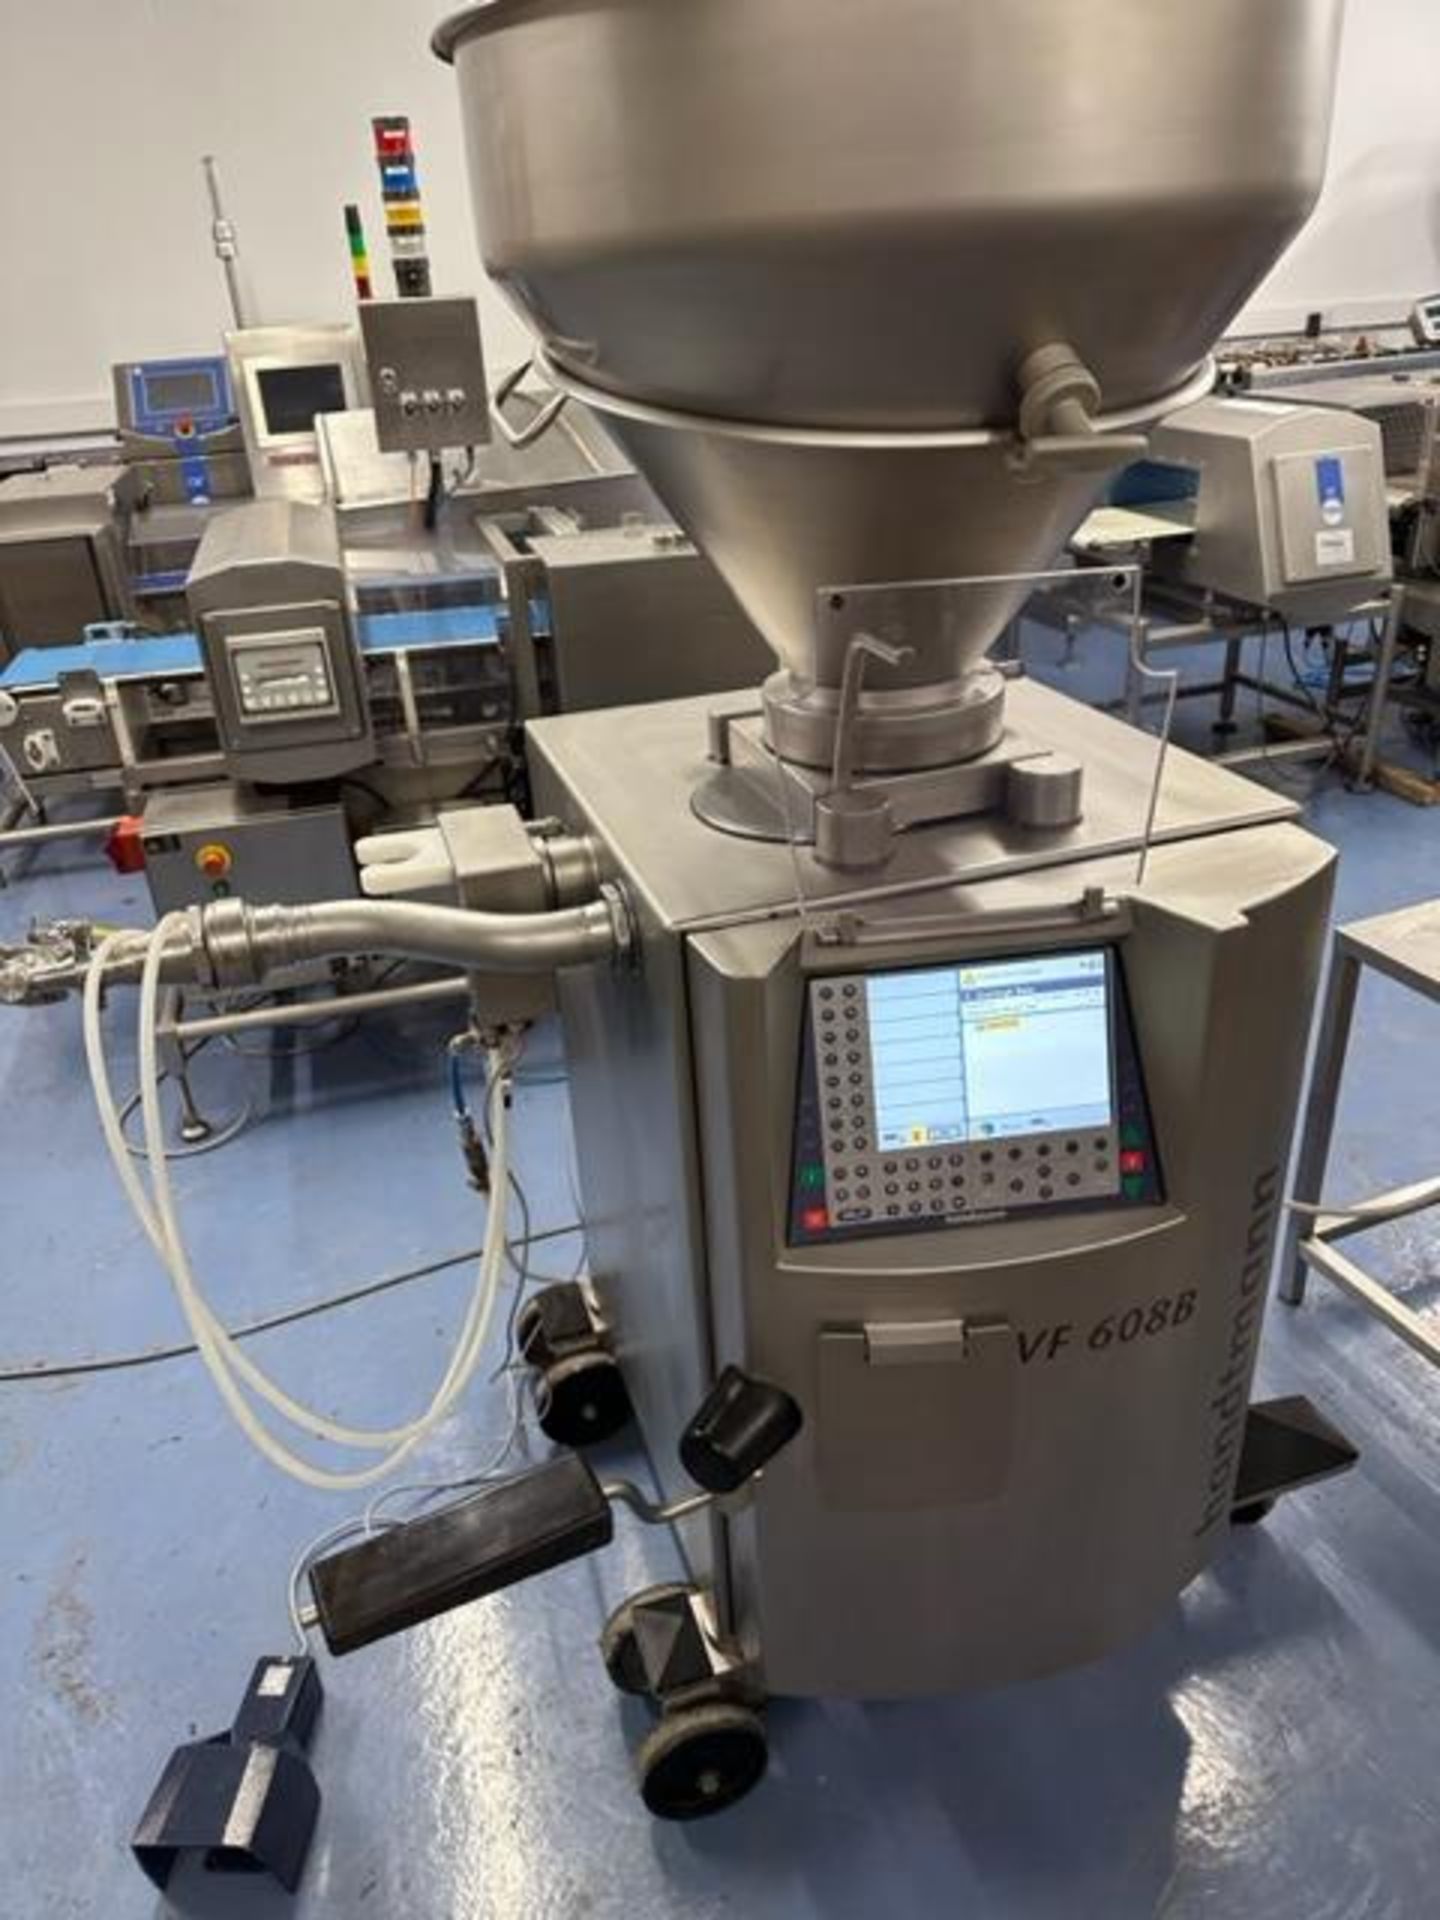 HANDTMANN VF608B MOBILE VACUUM FILLER, AS NEW. WITH LOTS OF SPARES.